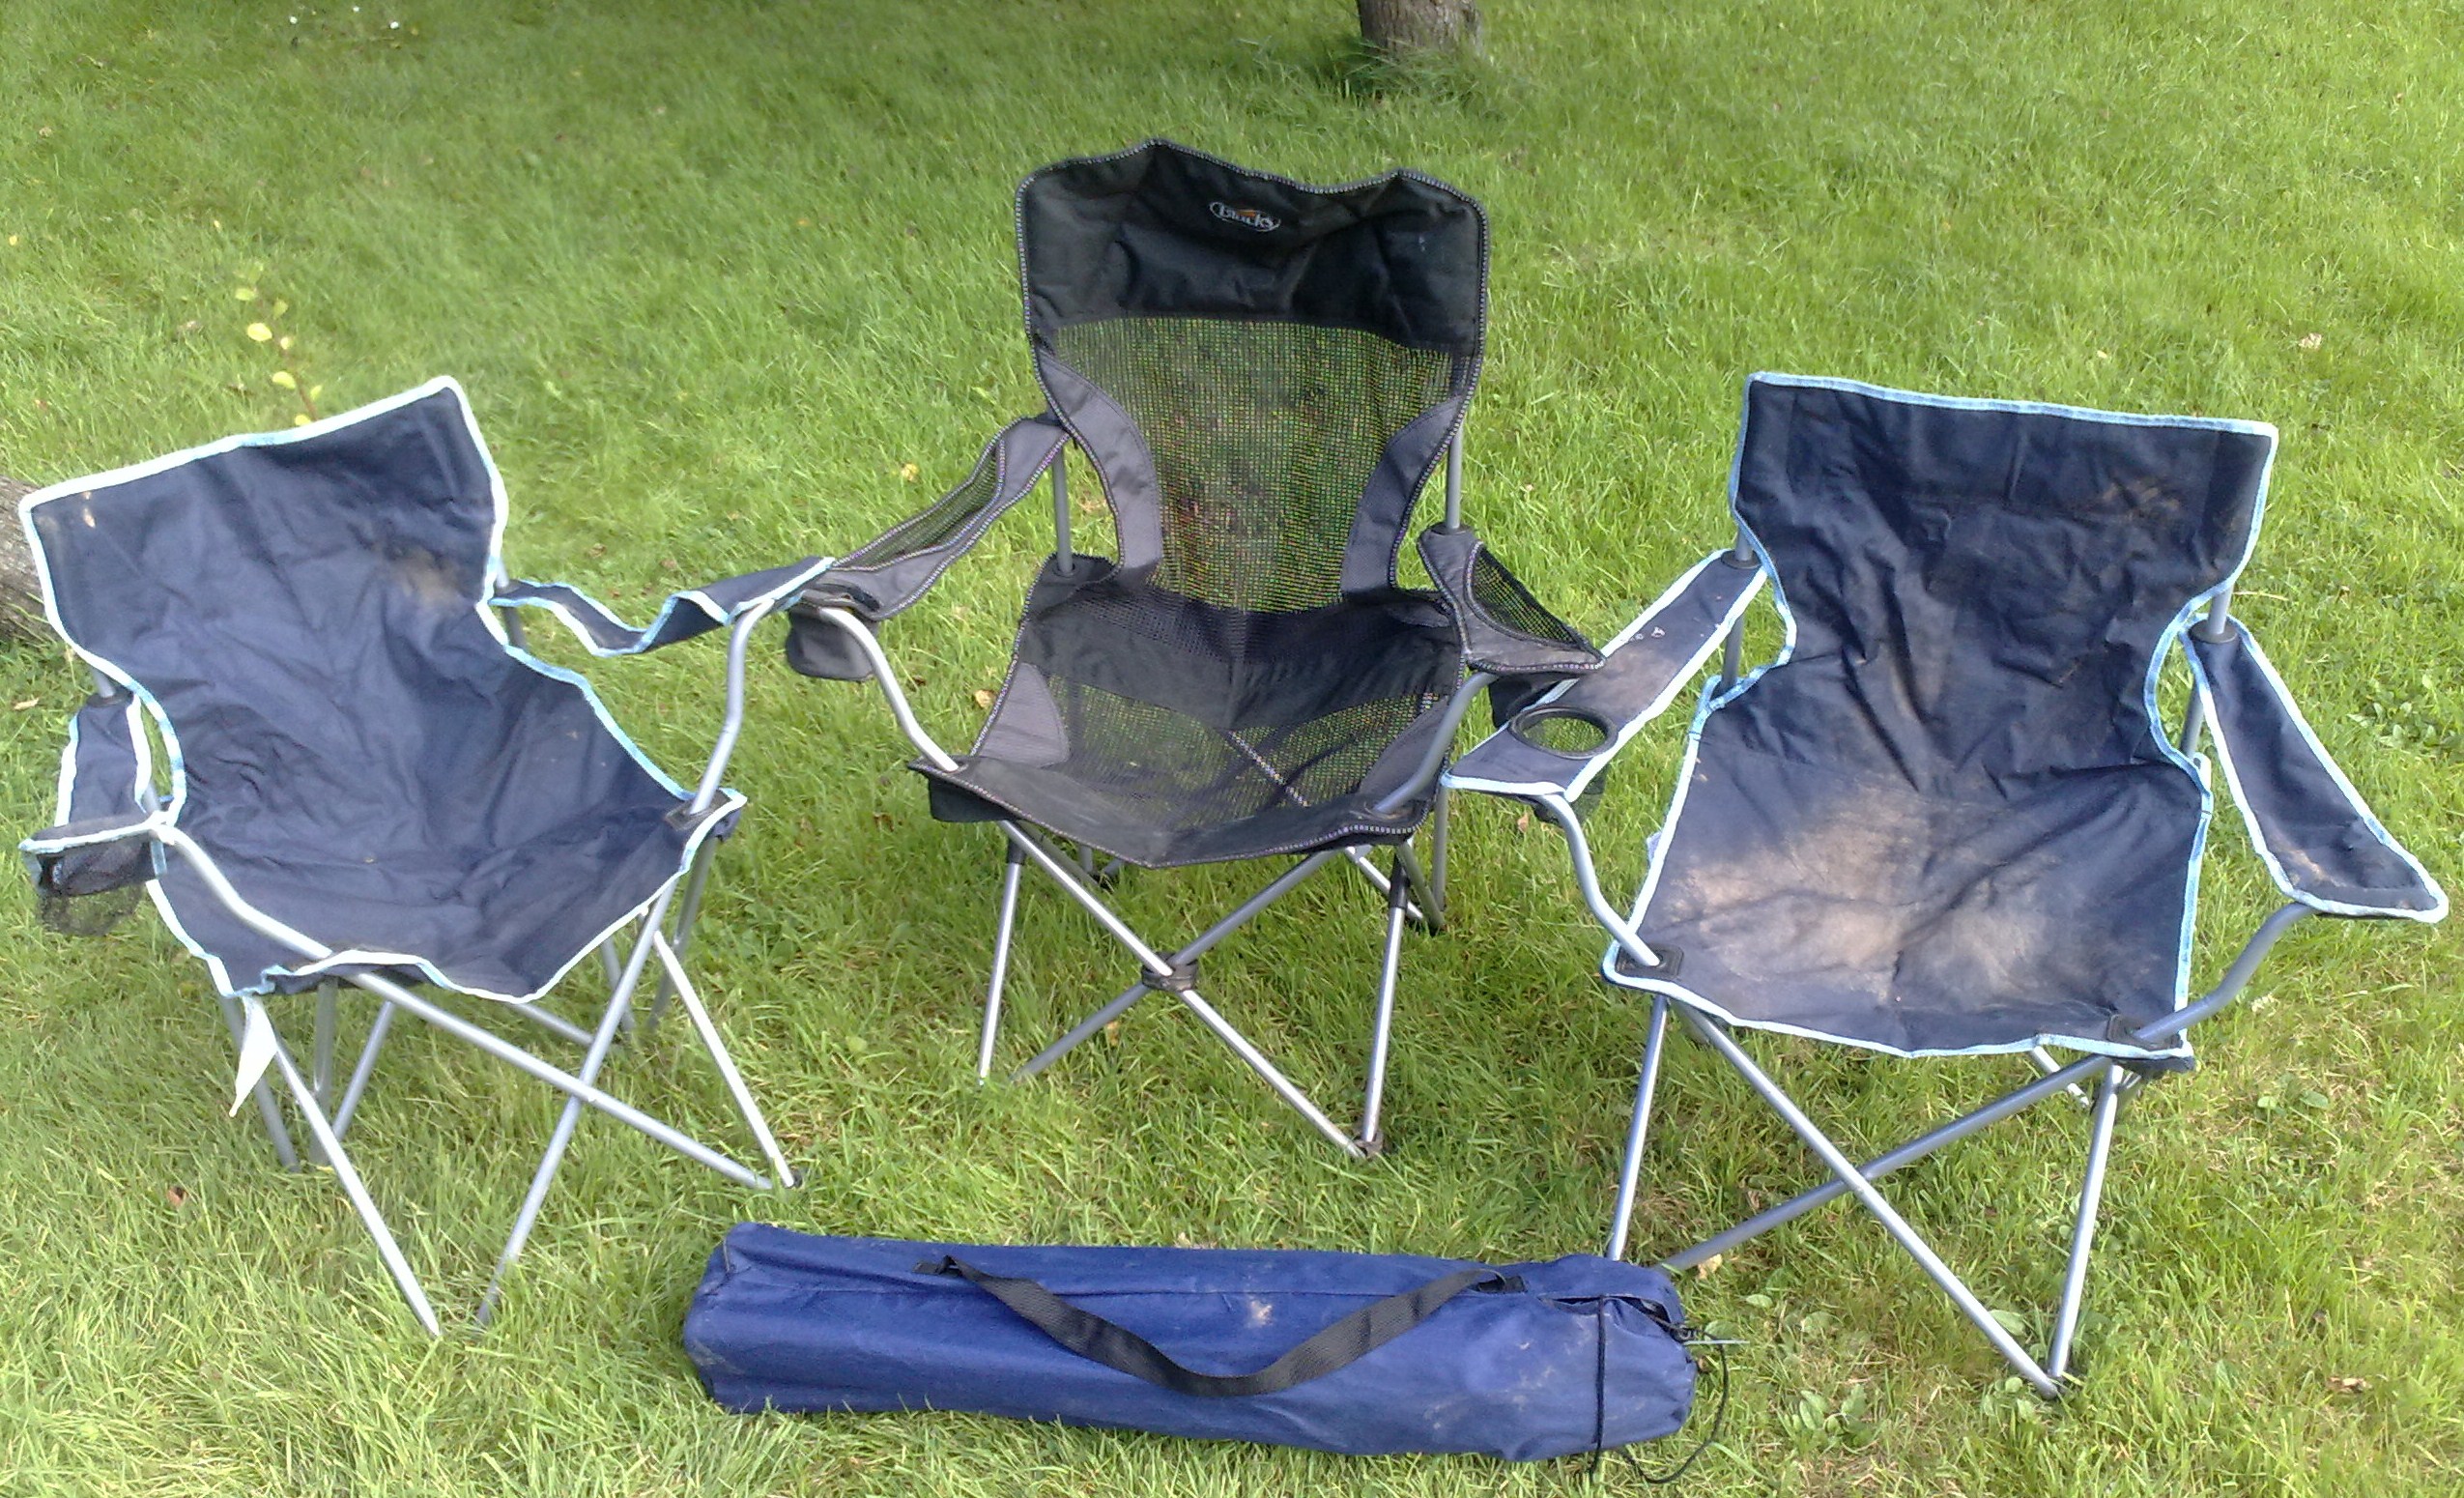 R Hire Shop Ltd Pit Barrier Hire Camping Chairs